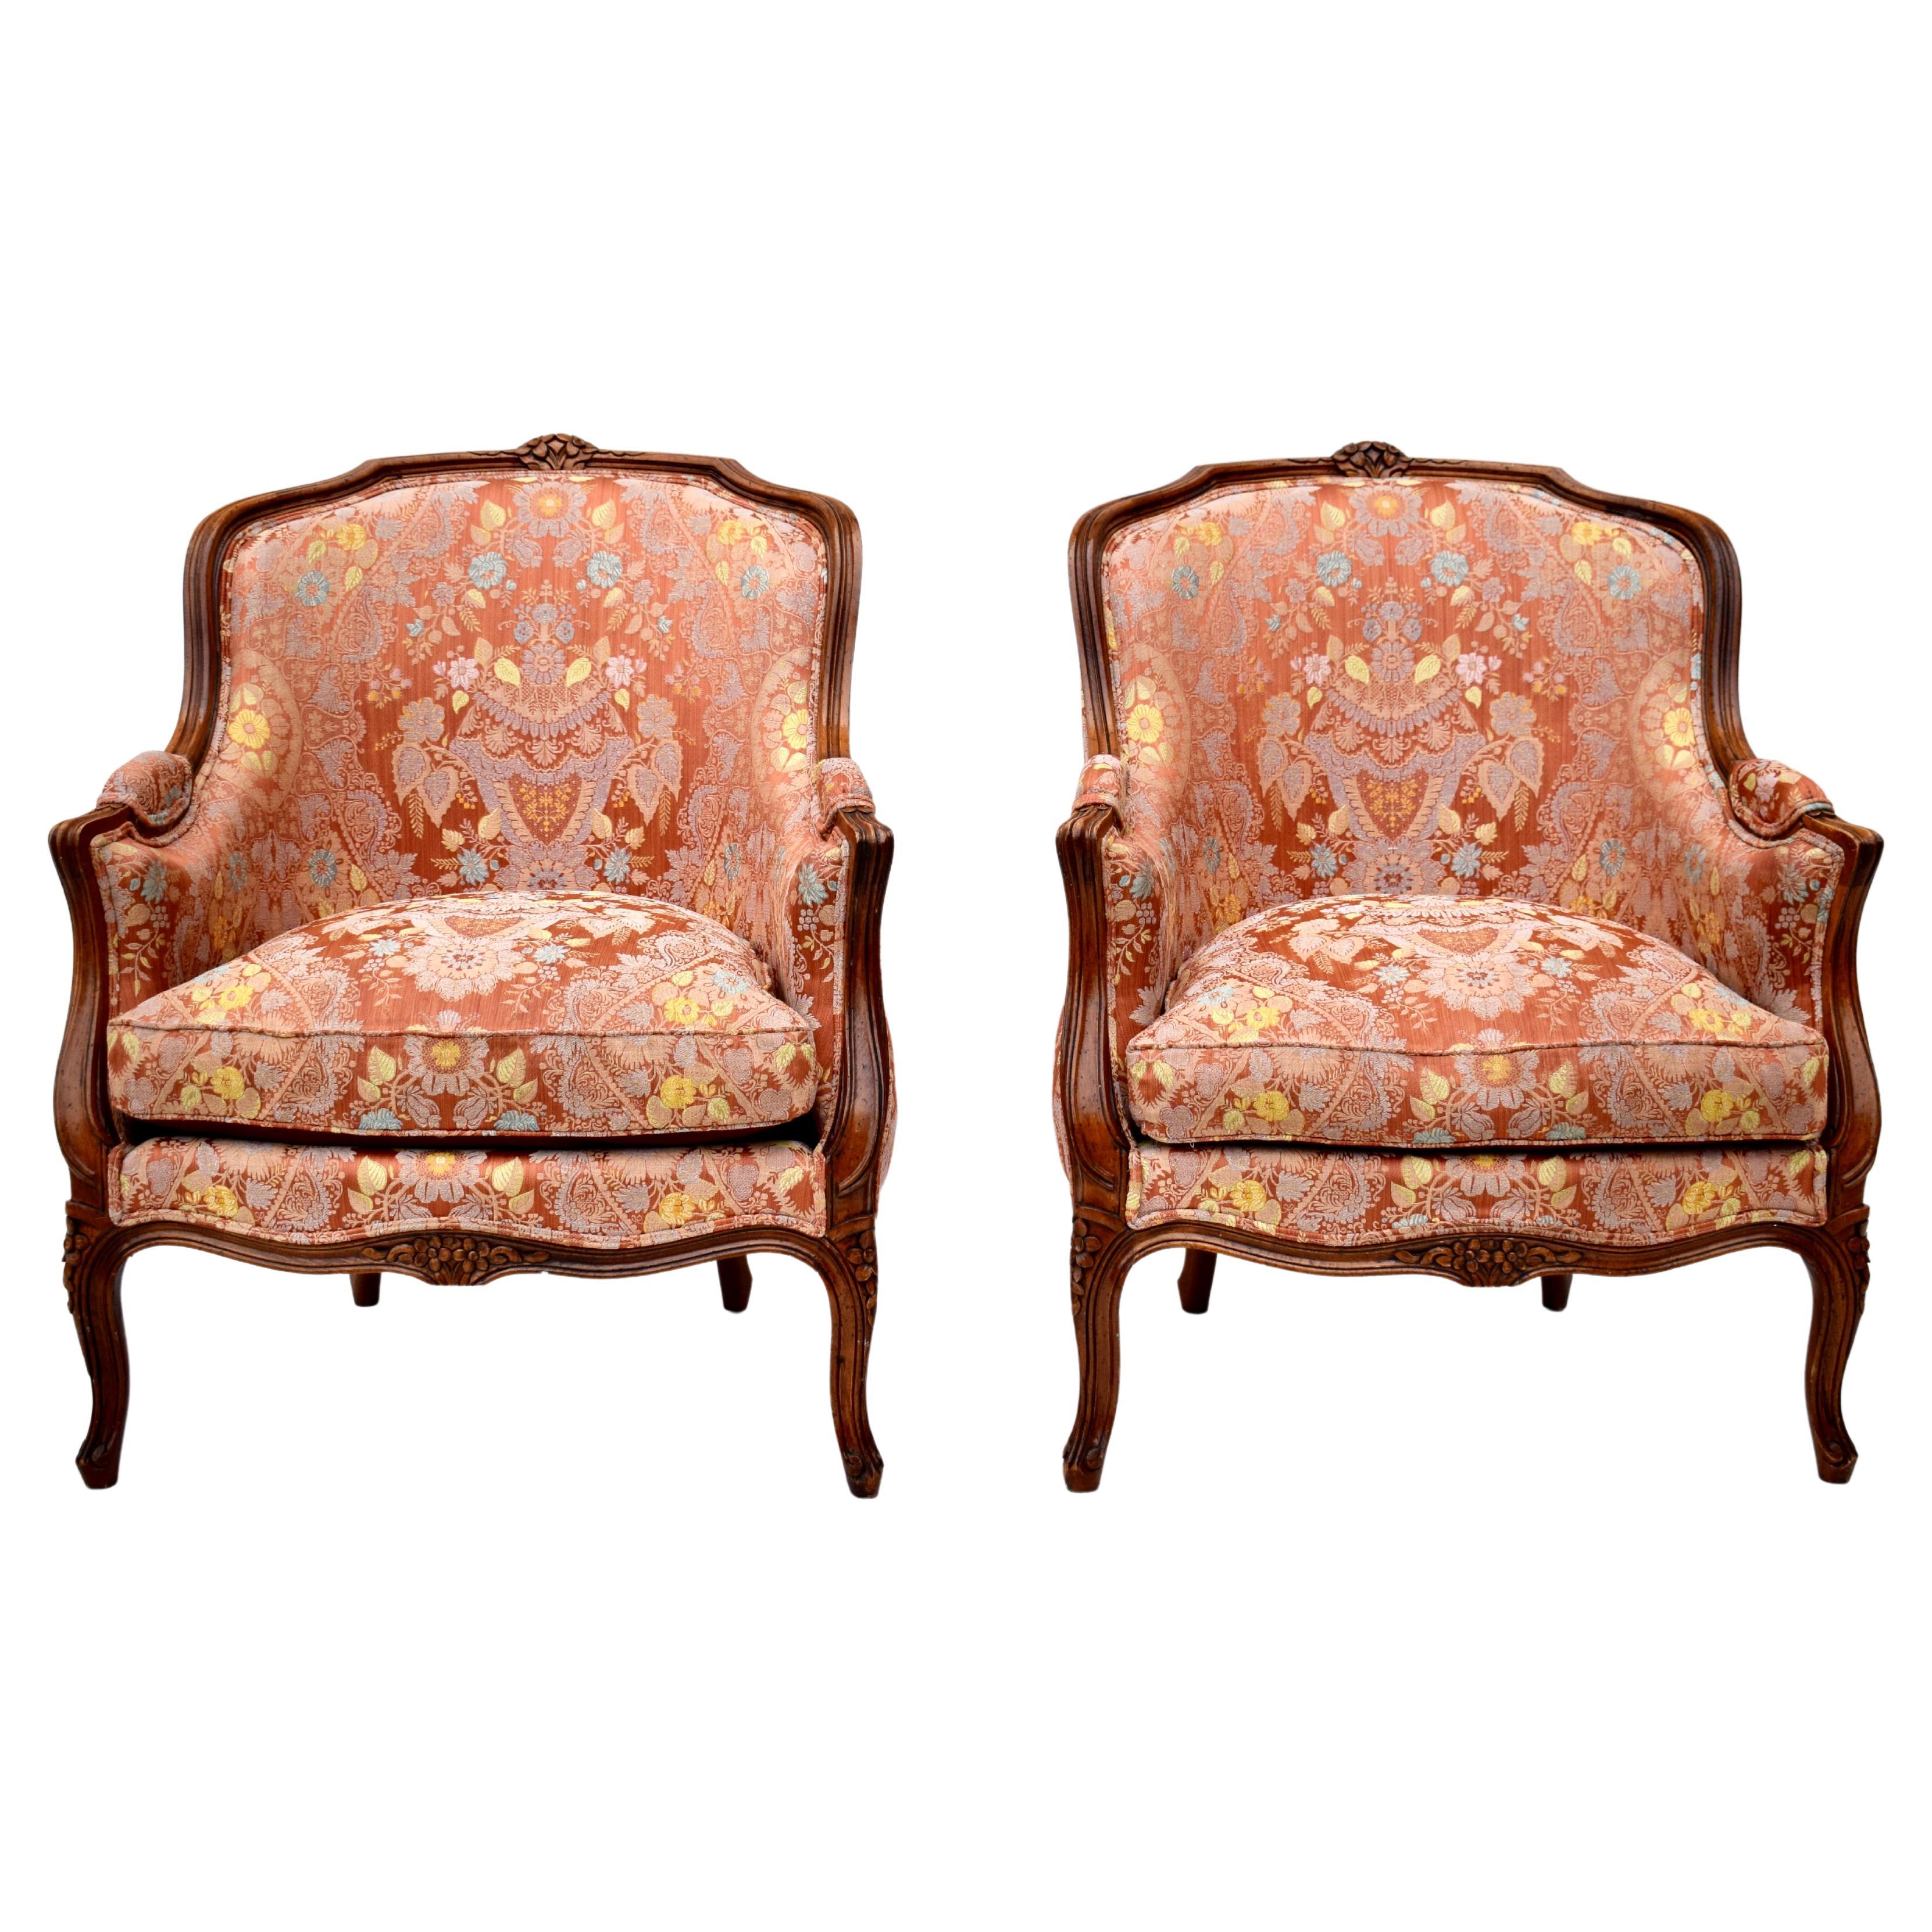 Pair of Antique 19th Century Gold Leaf Louis XV Style Bergere